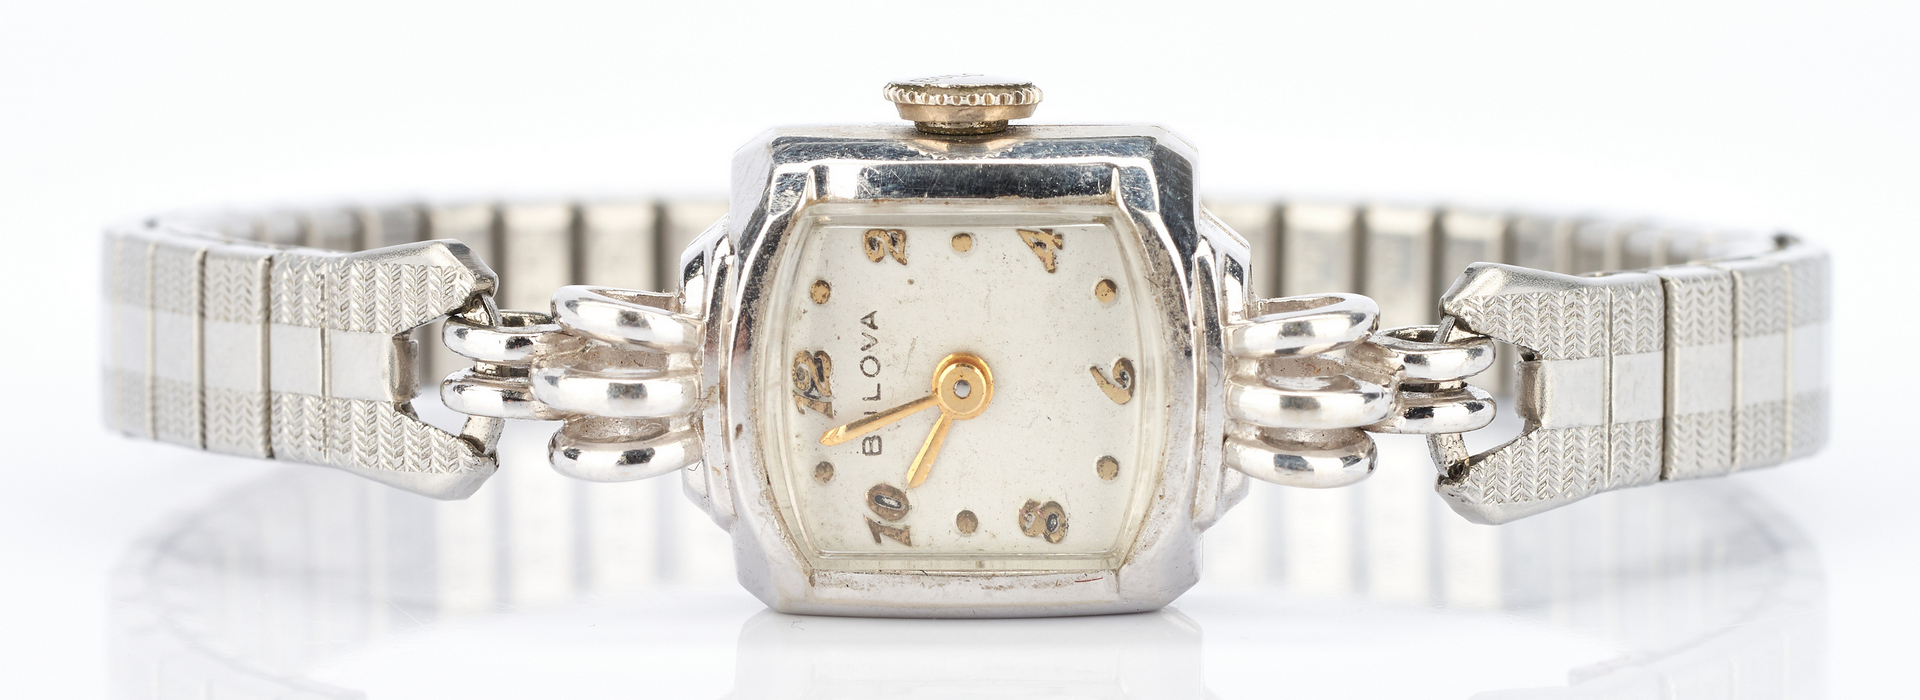 Lot 1035: 2 14K Bulova watches, one in rose gold with